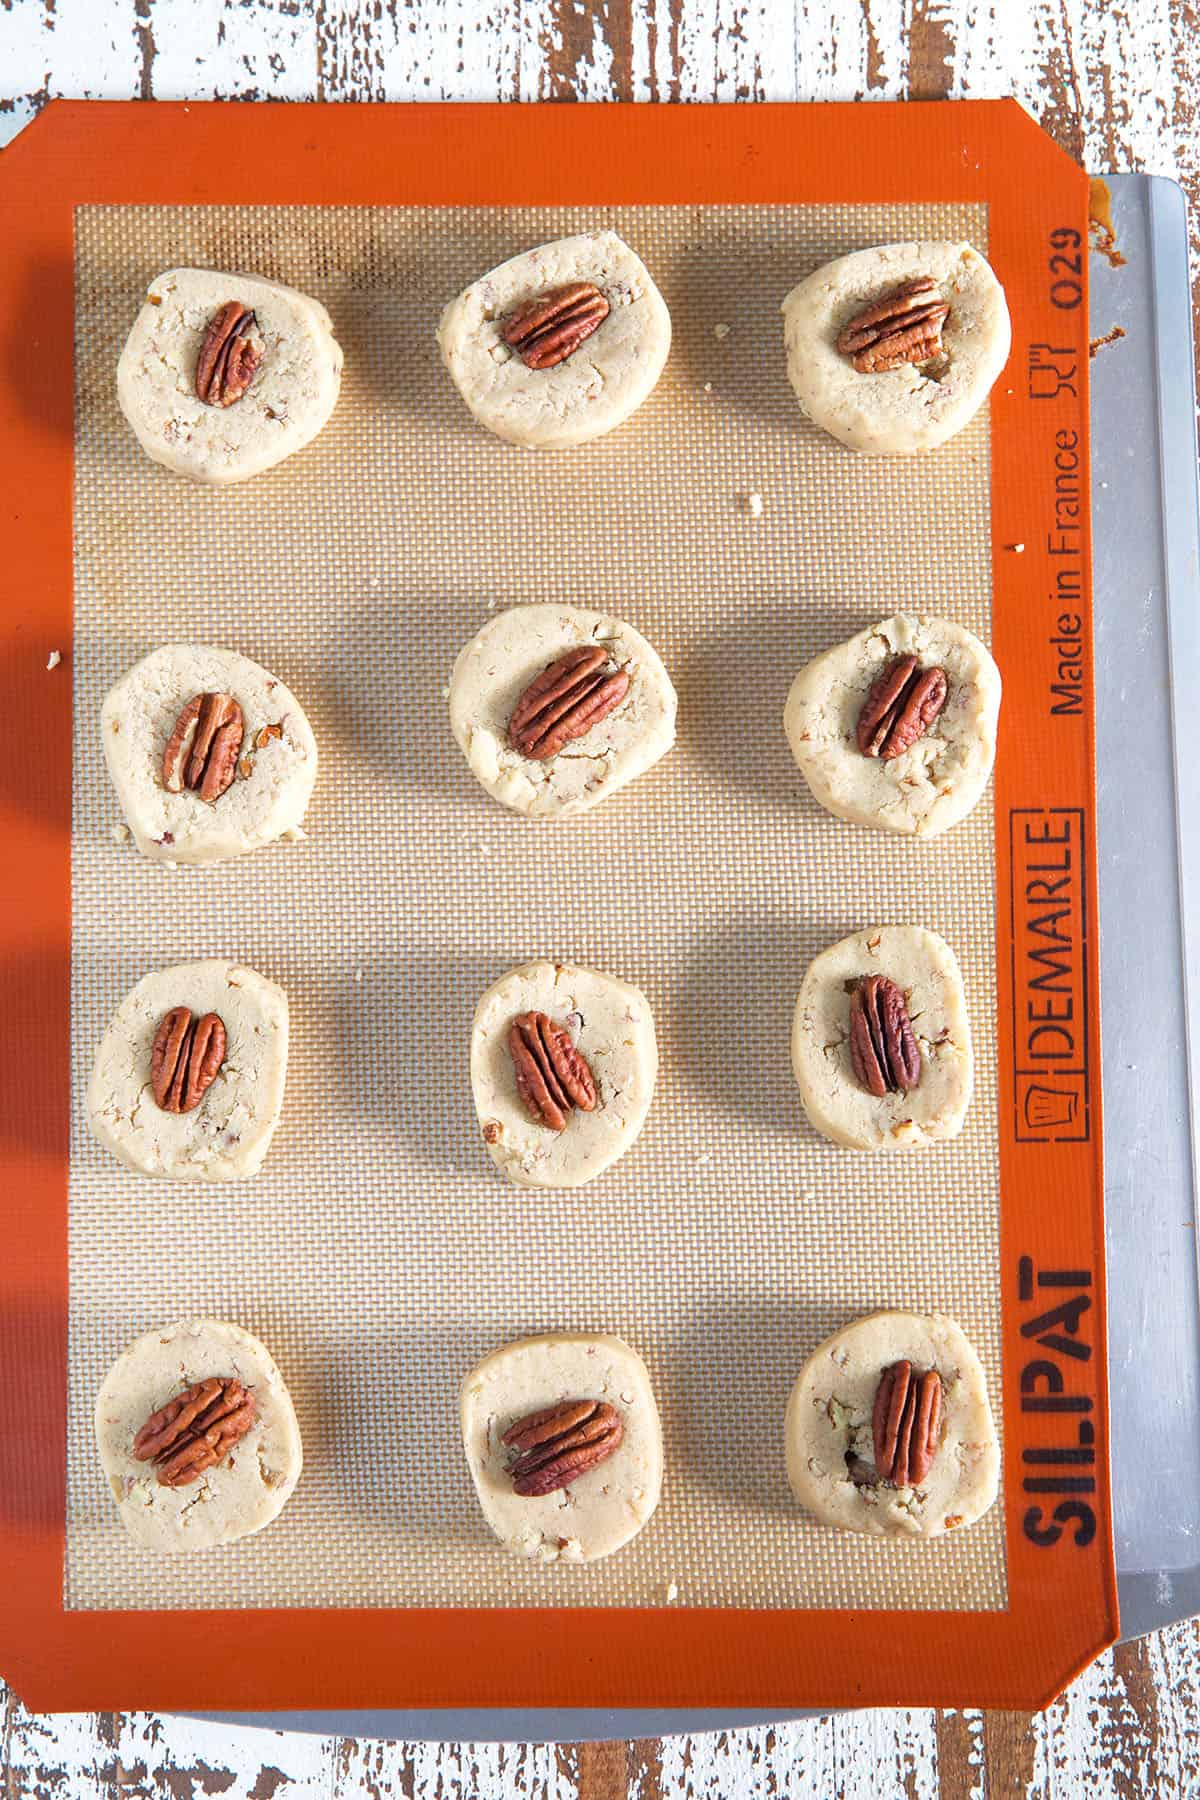 A dozen pecan sandies are placed on a siplat covered baking sheet.